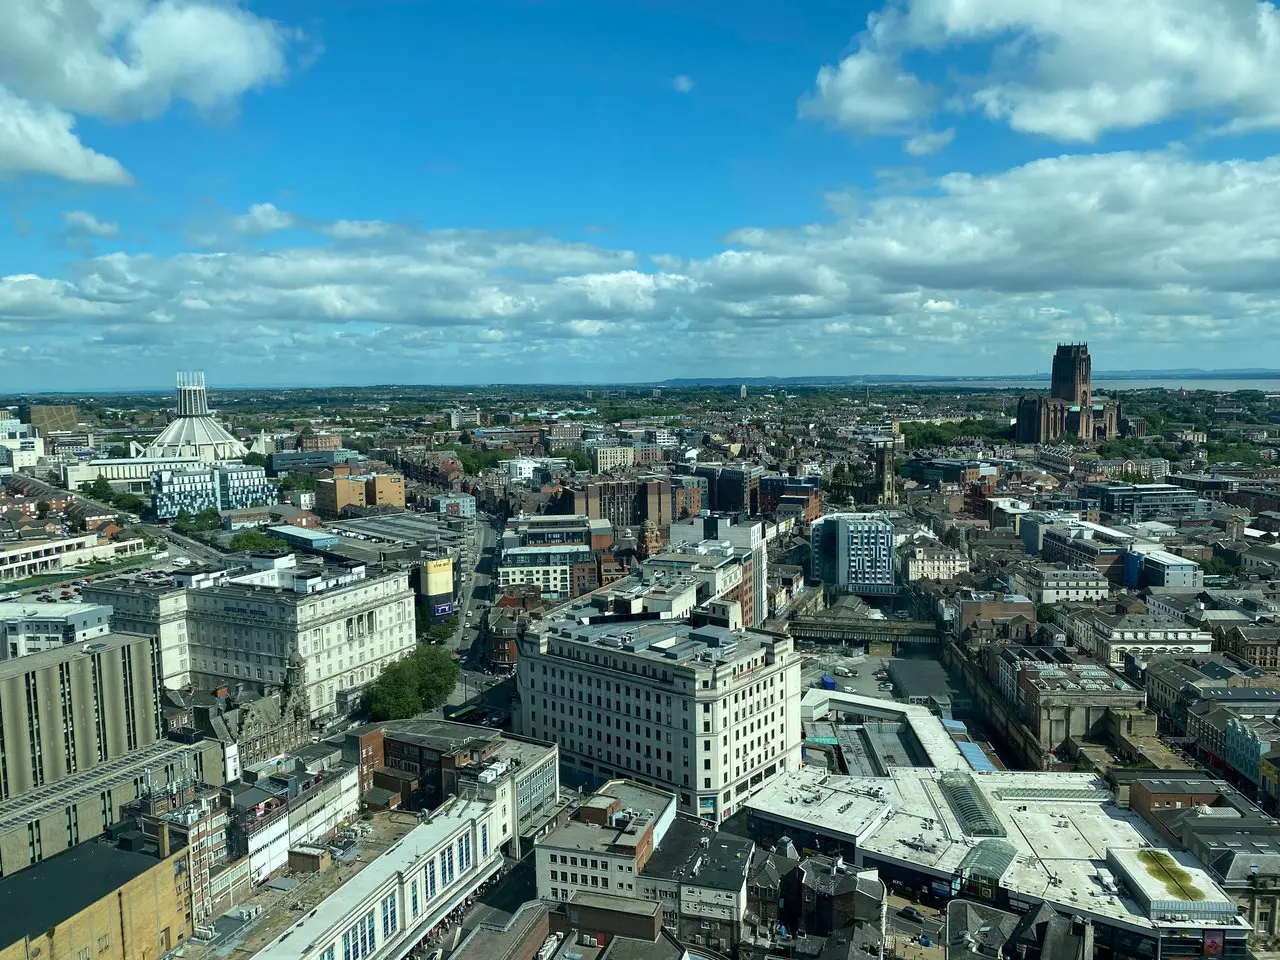 A view of the Liverpool city skyline, including the Liverpool Cathedral and the Liverpool Metropolitan Cathedral, from above, at the top of the St John's Beacon